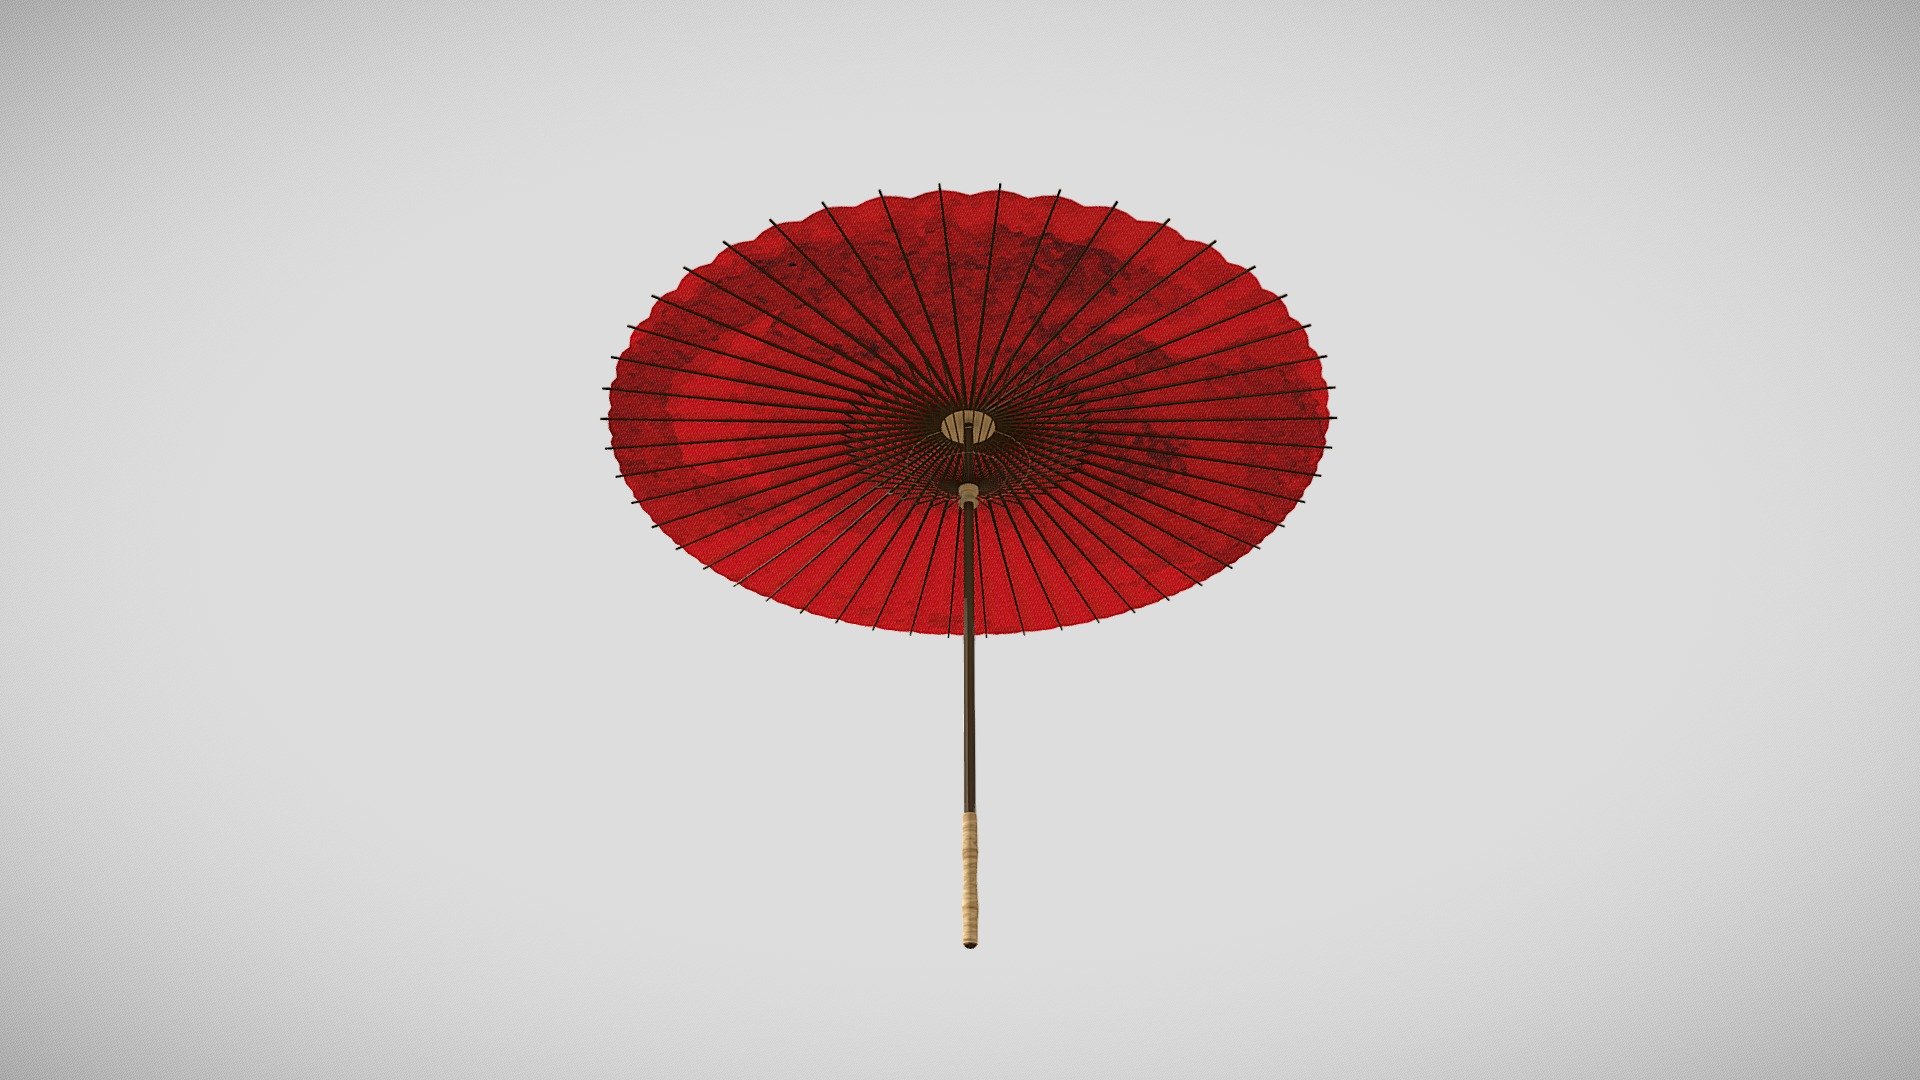 Traditional Japanese Umbrella Low-Poly
Like this model please if you download it, be Kind :) - Japanese Umbrella | Download = Like please - Download Free 3D model by VRA (@architect47) 3d model